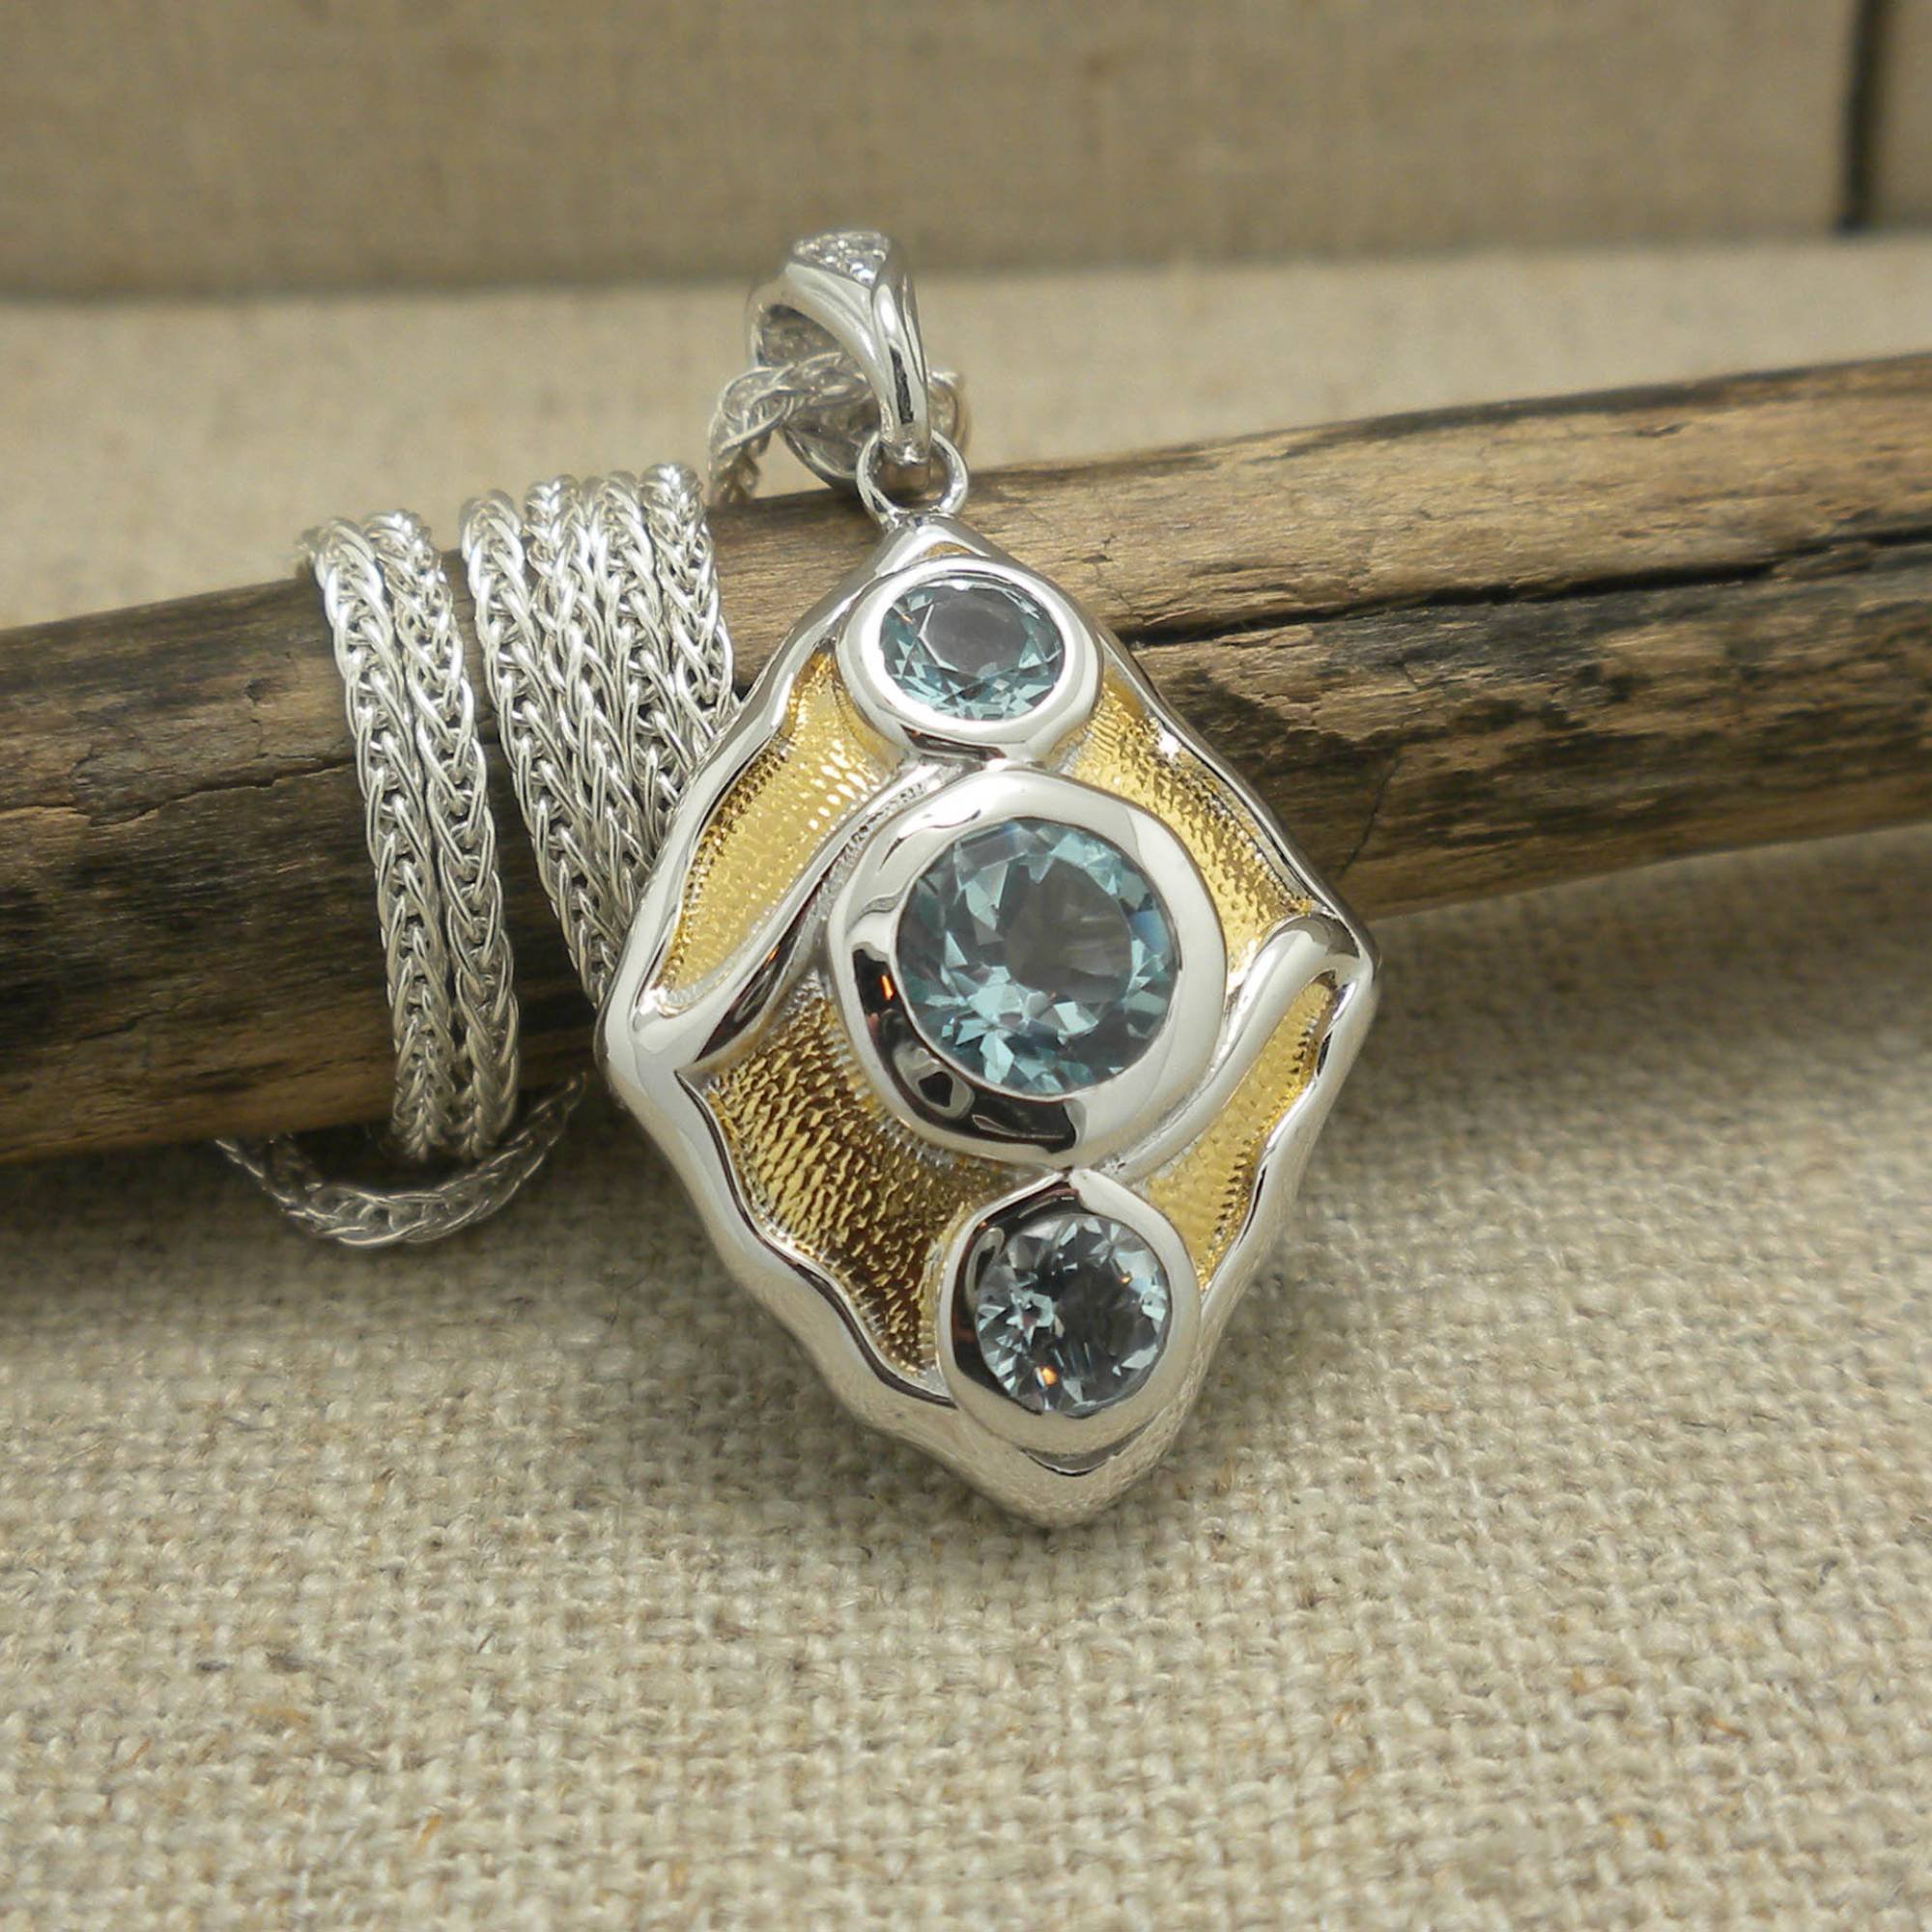 Sterling Silver with 23K Gilding Rocks 'N Rivers Pendant with Sky Blue Topaz